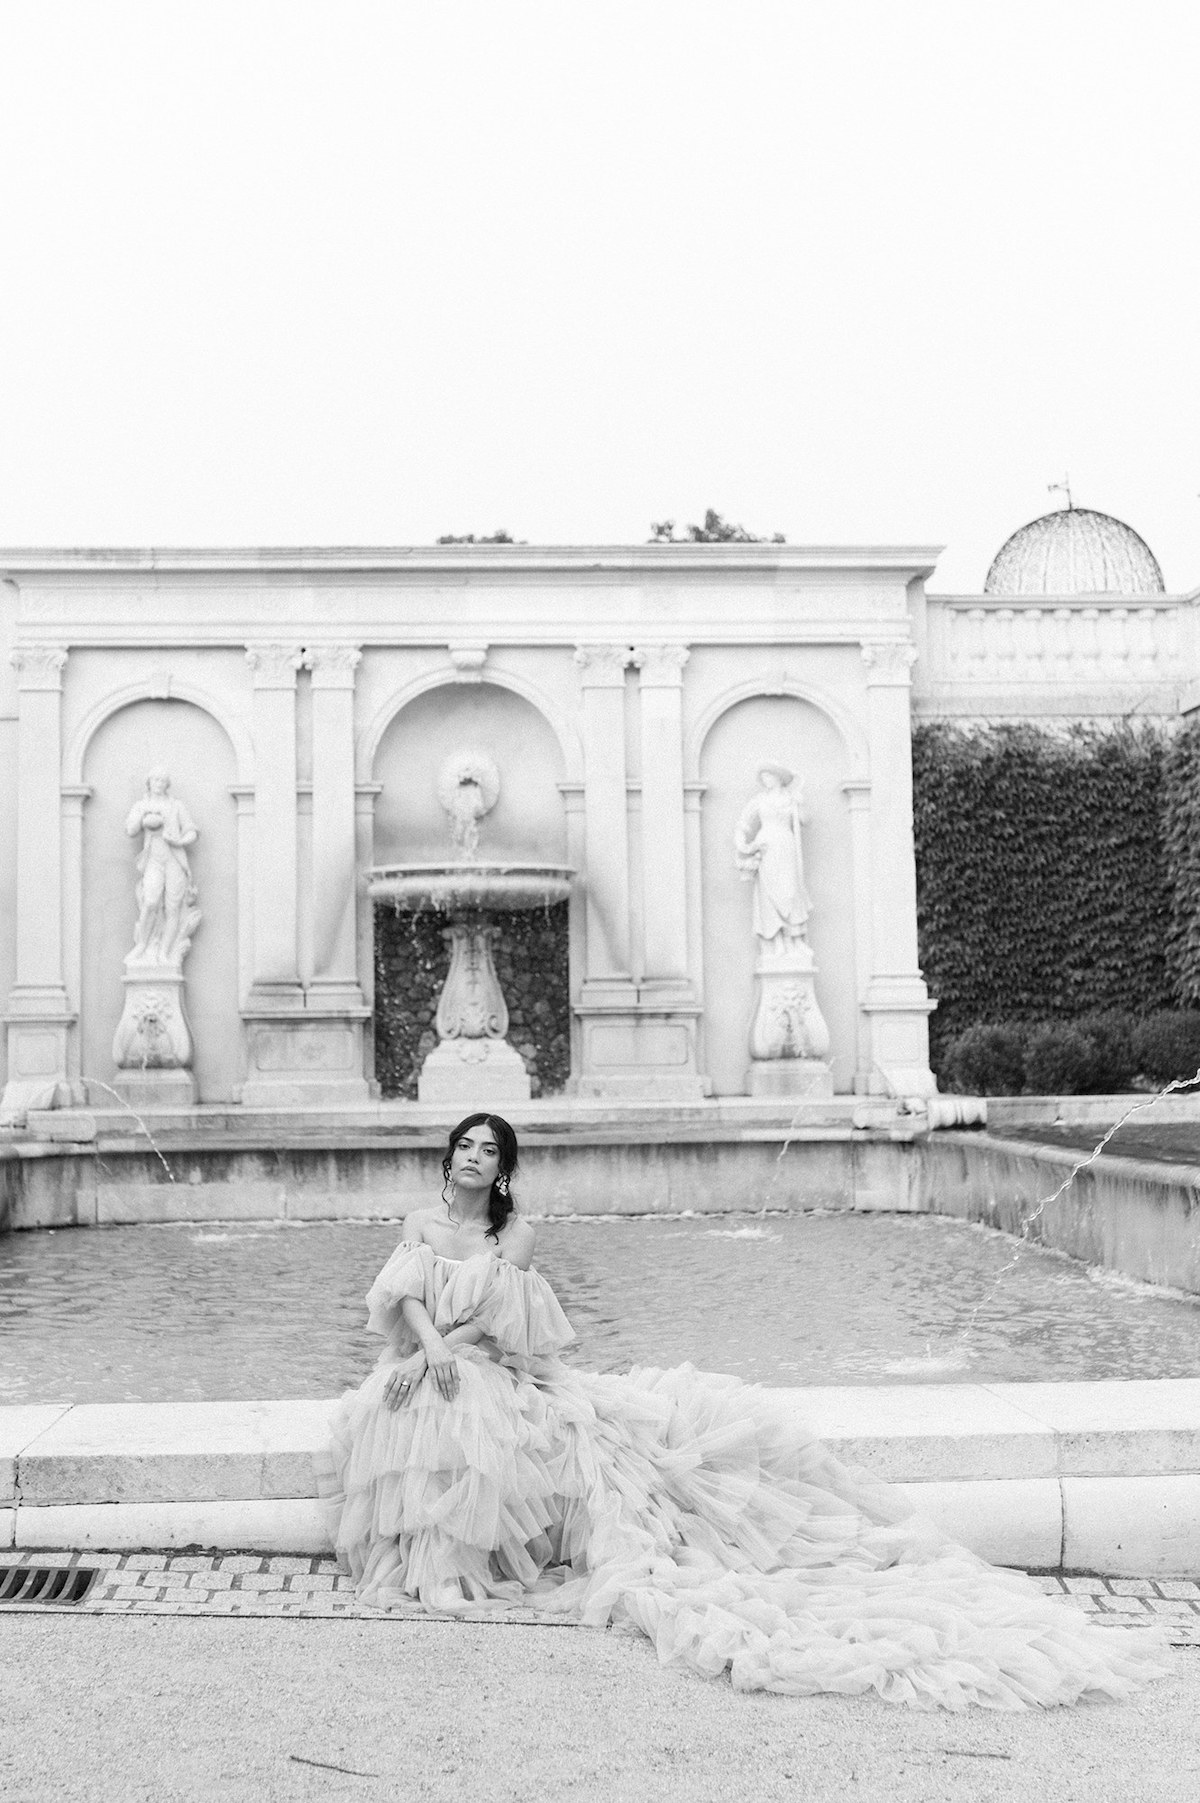 Karla, adorned in a tiered couture gown in soft mauve, radiates timeless beauty in a stunning black and white portrait at Longwood Gardens.